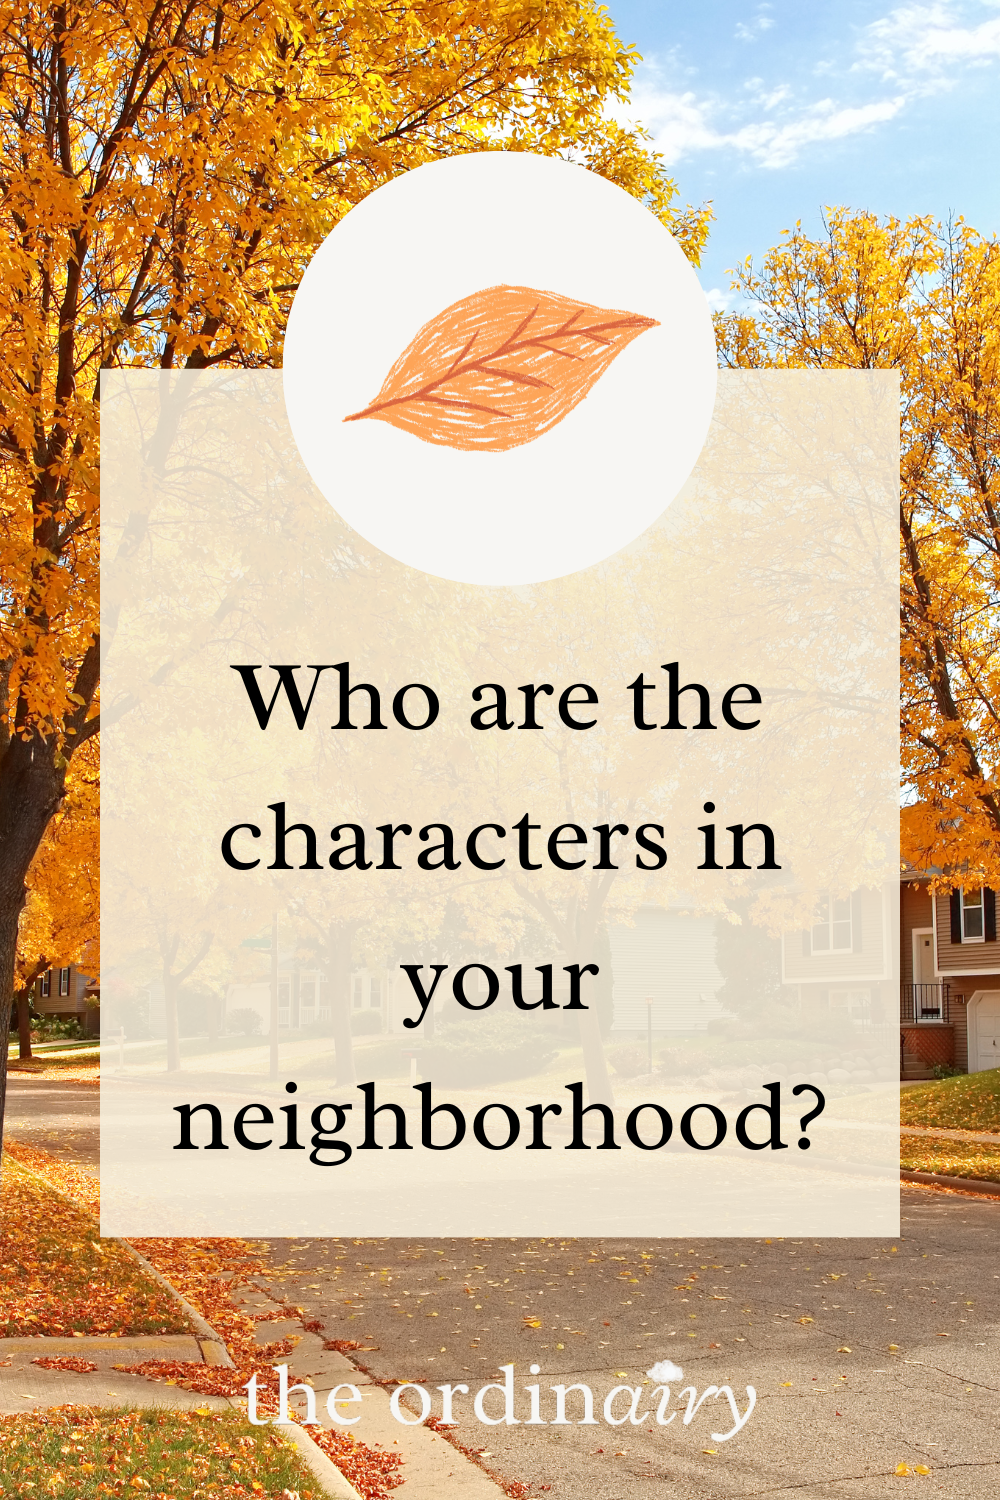 Who are the characters in your neighborhood?